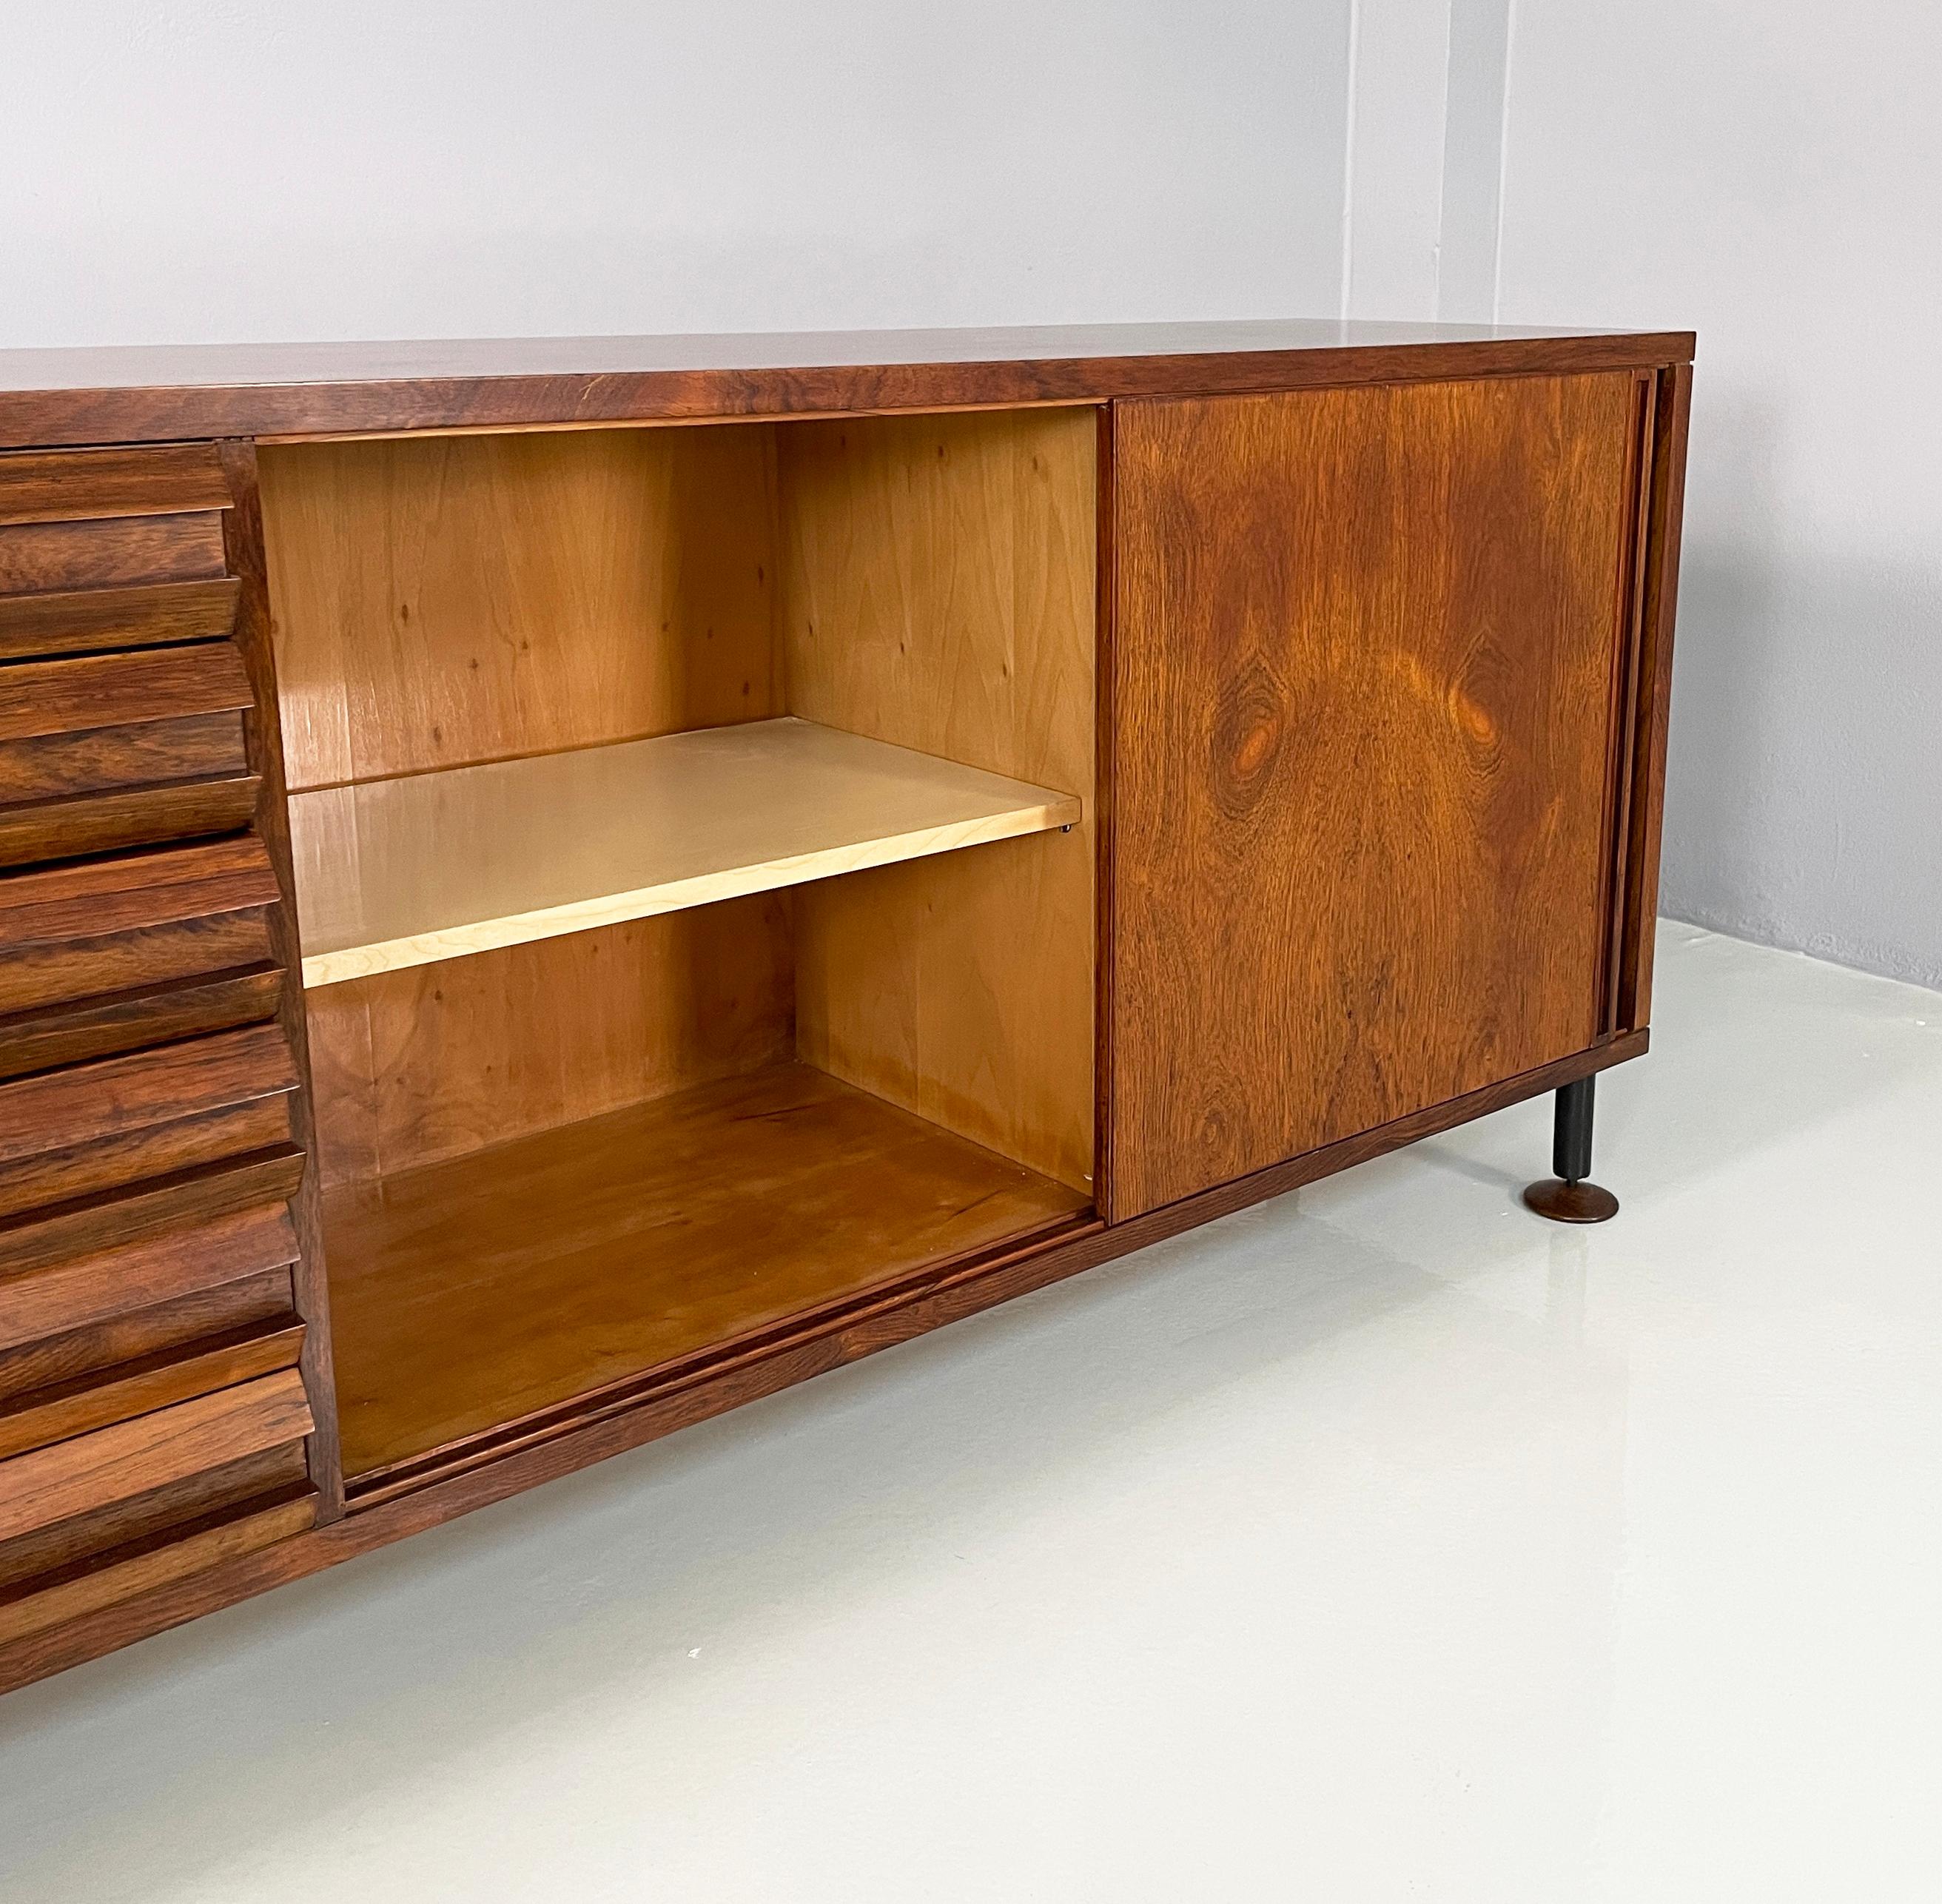 Italian mid-century modern Wooden sideboard with drawers and shelves, 1960s For Sale 12